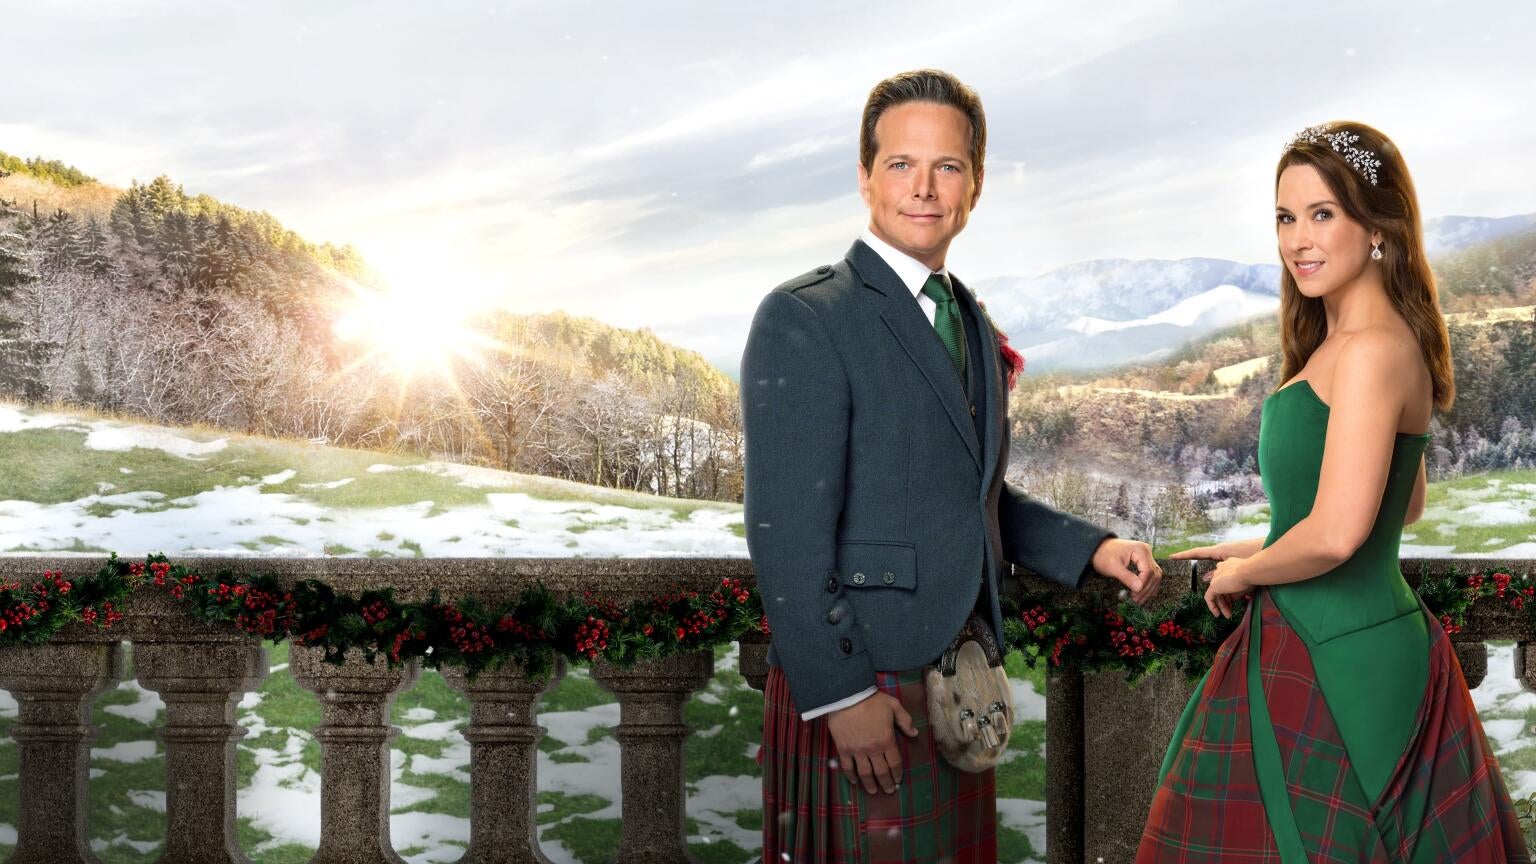 "A Merry Scottish Christmas" airs as part of Hallmark's Countdown to Christmas on Saturday, Nov. 18.